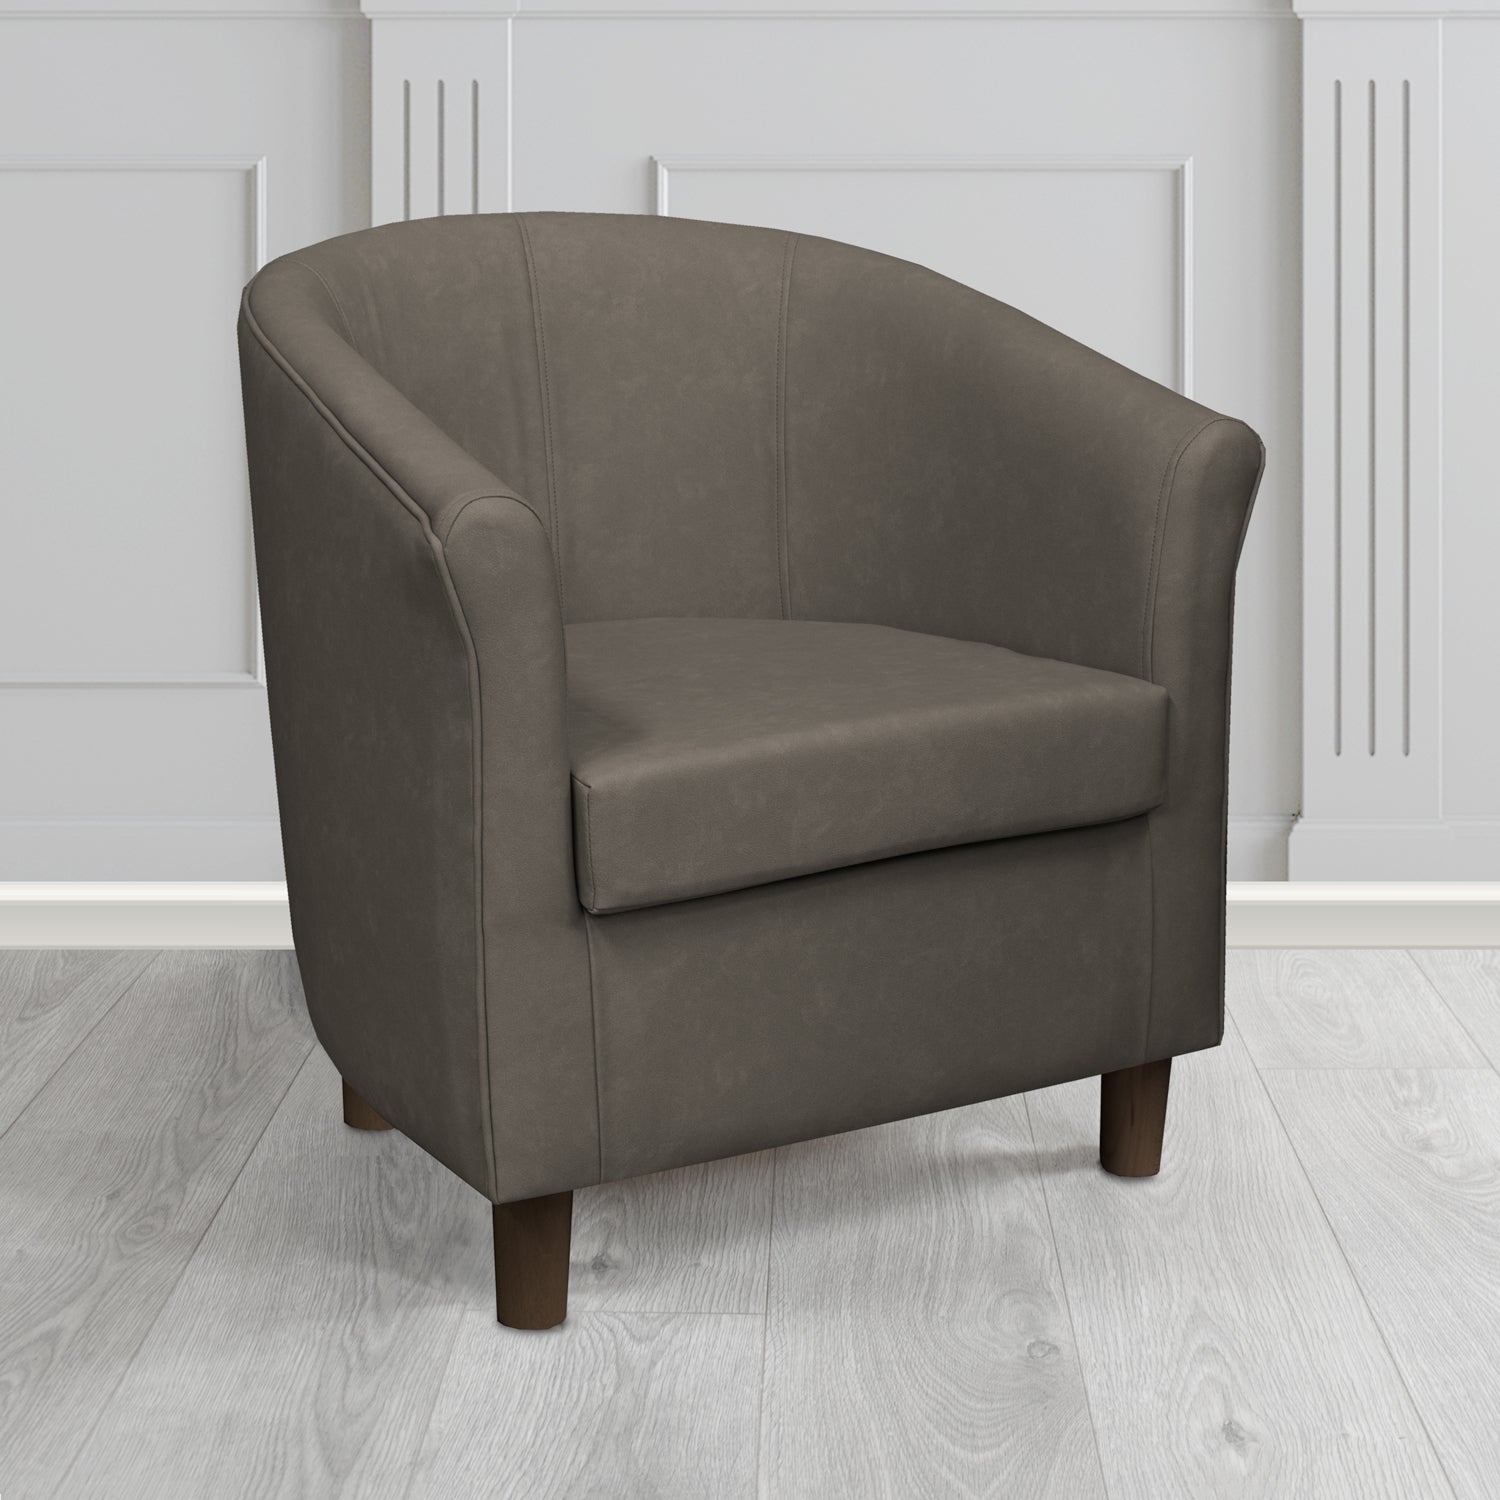 Tuscany Tub Chair in Infiniti Espresso INF1851 Antimicrobial Crib 5 Faux Leather - The Tub Chair Shop